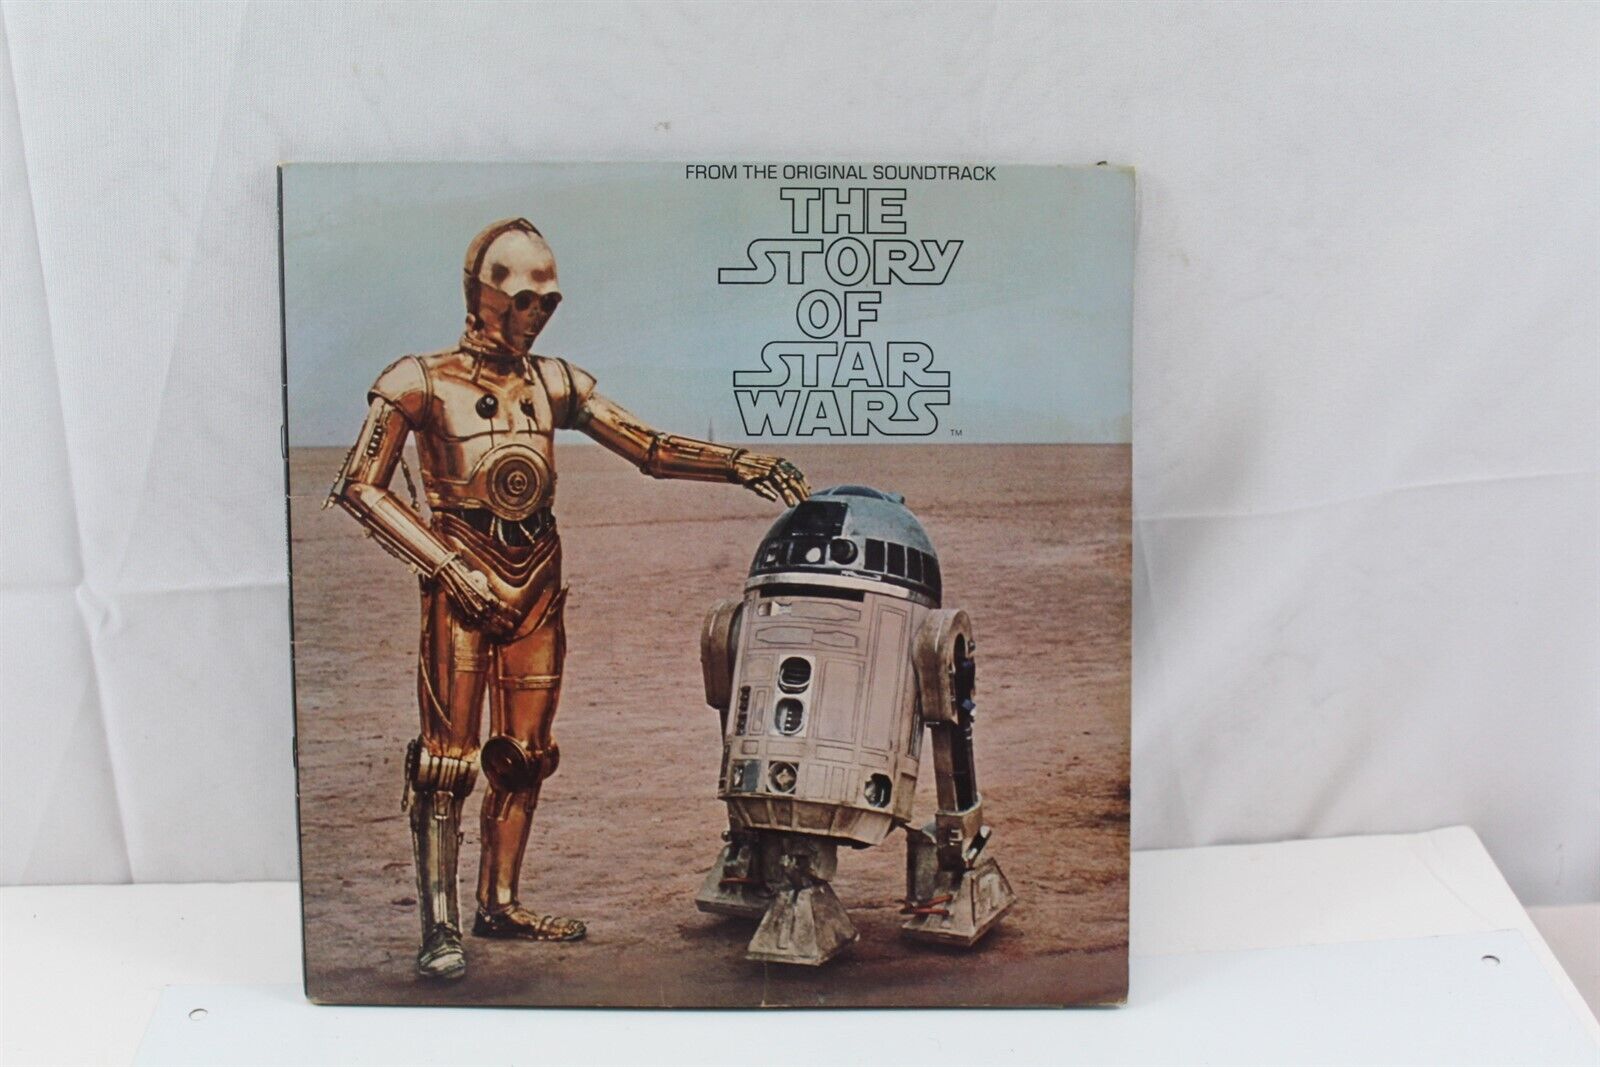 The Story of Star Wars 1977 Vinyl Record & Picture Booklet From ORG Soundtrack